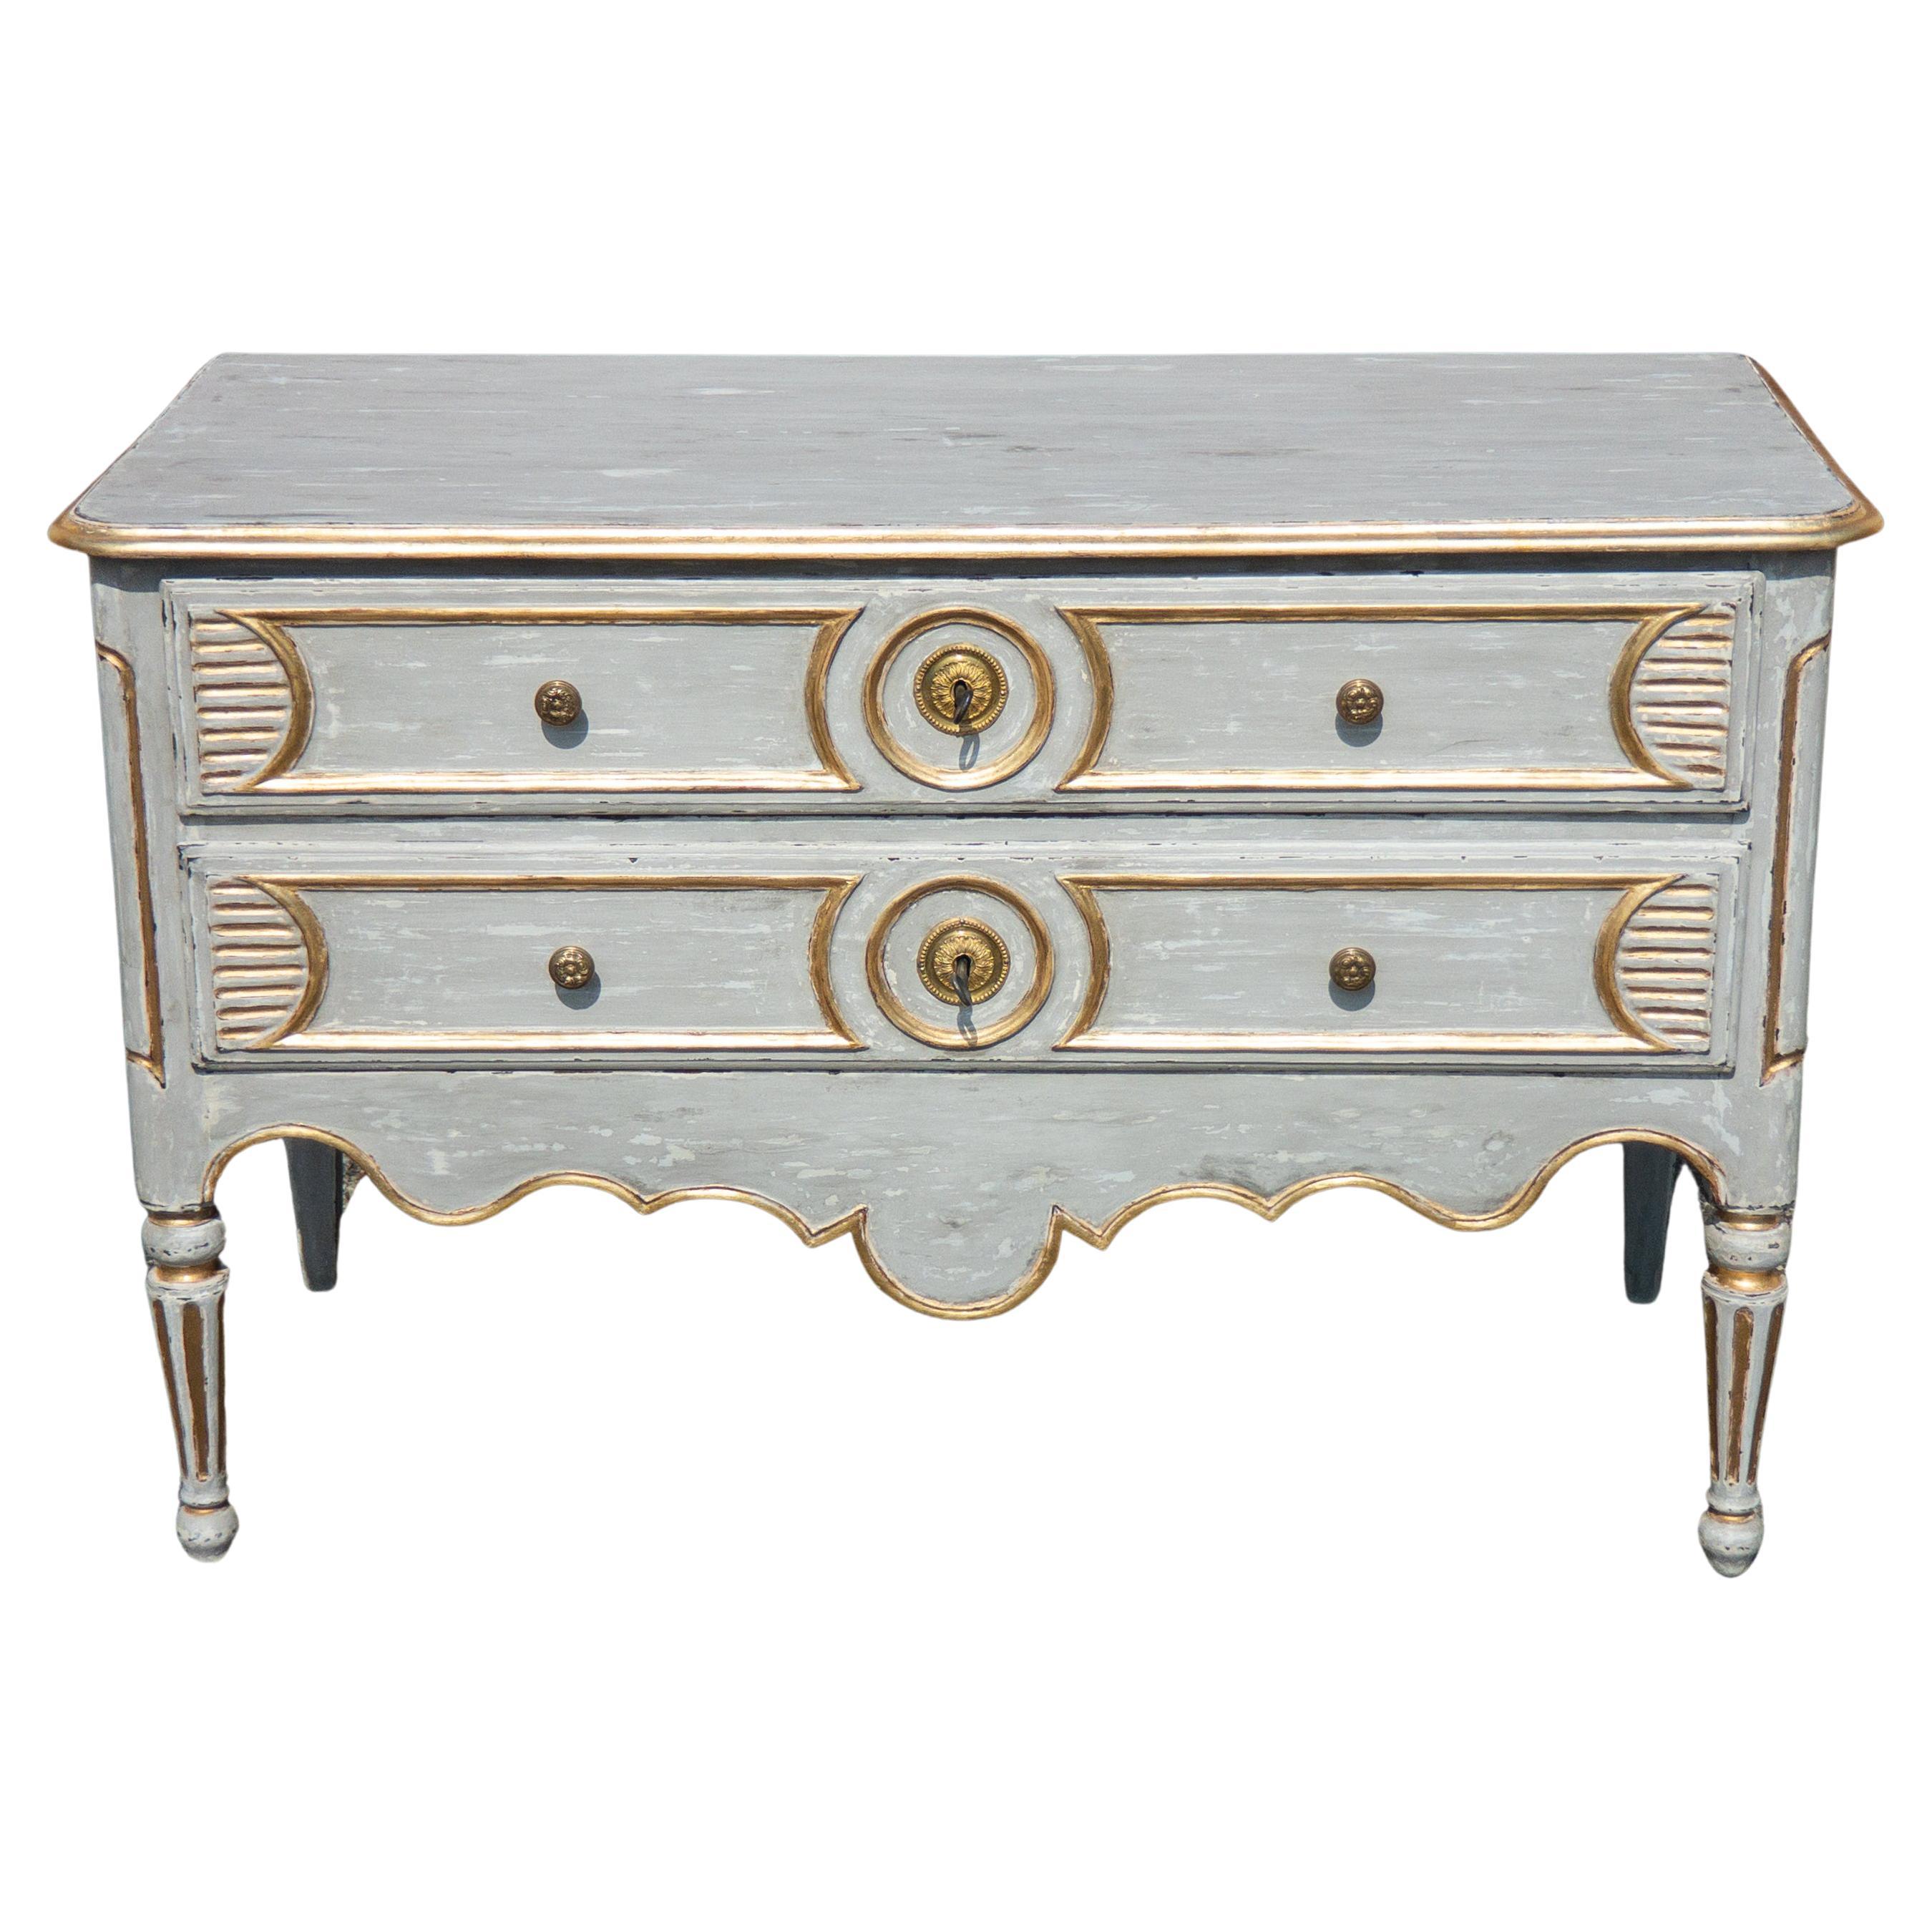 18th Century French Country Provincial Grey White and Gold Painted Commode For Sale